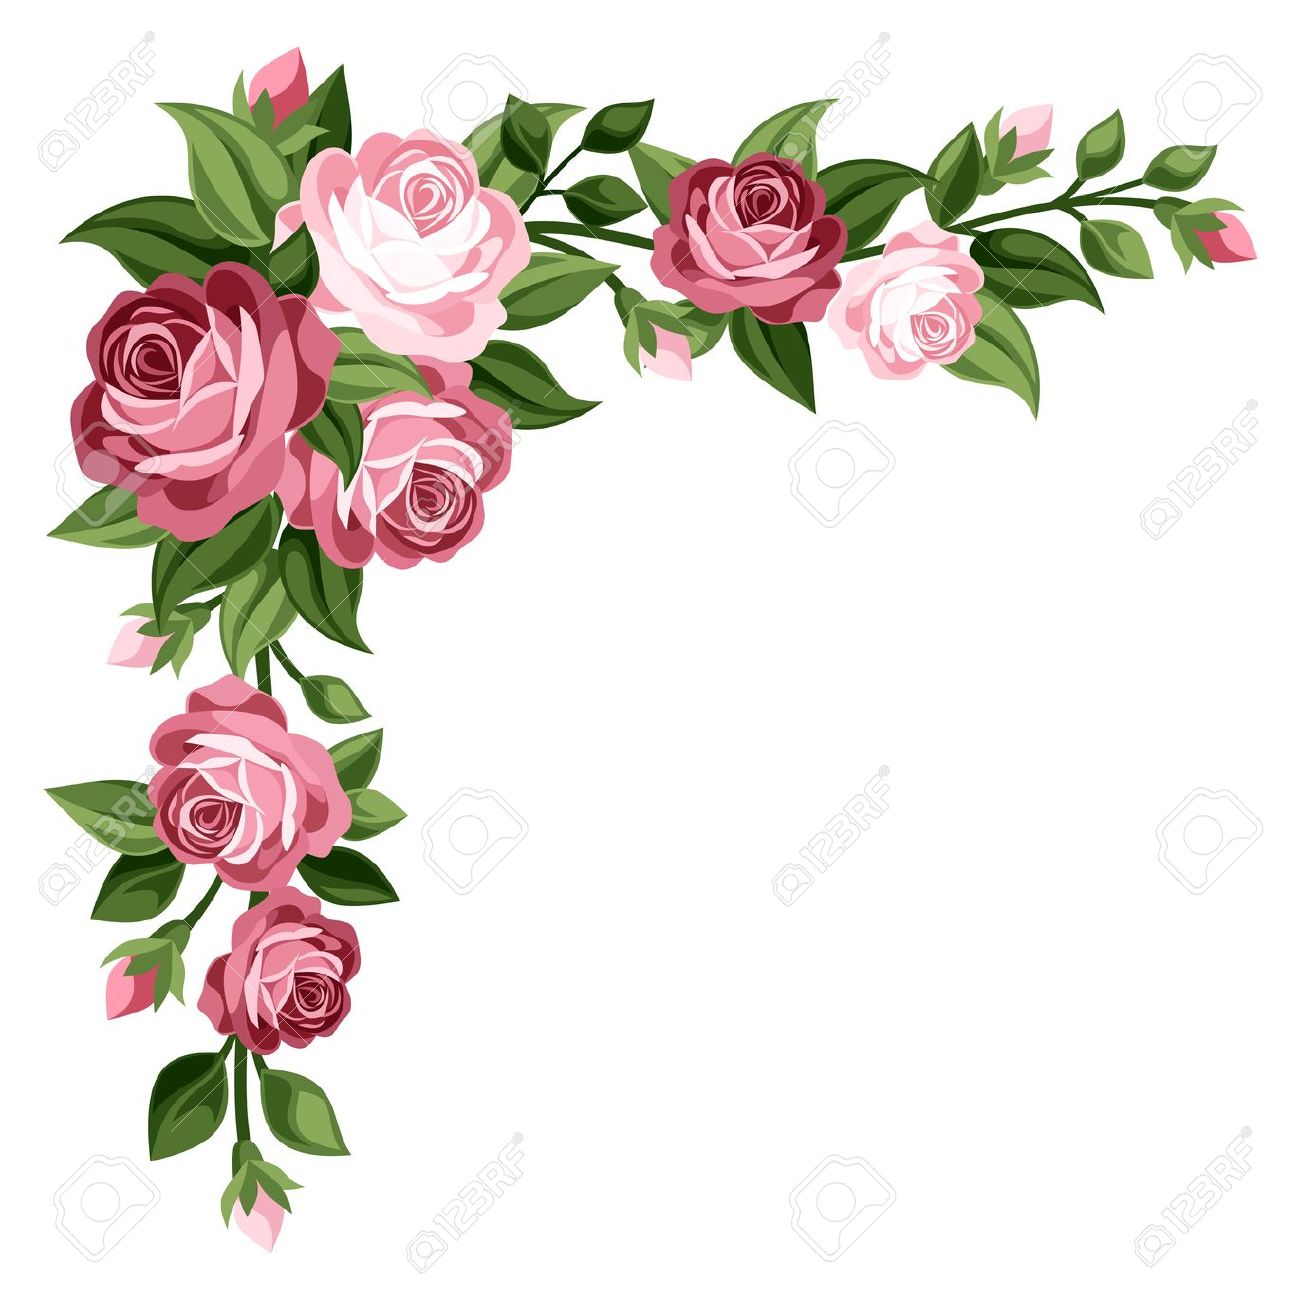 Flowers Borders Png Transparent Flowers Borders Png Images Pluspng